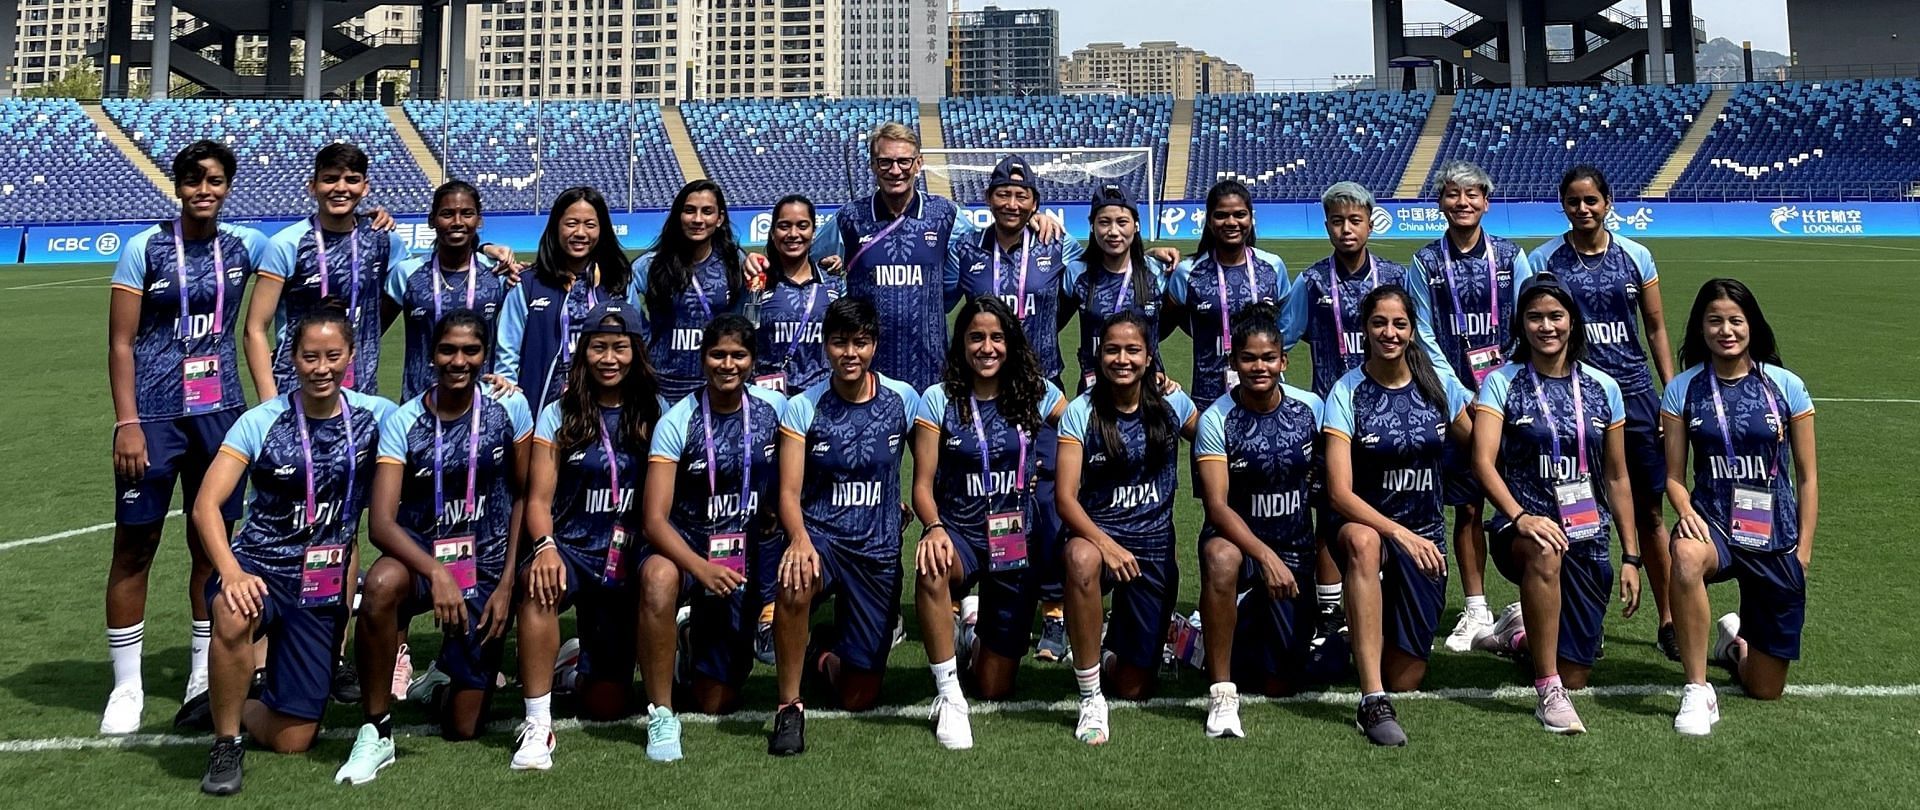 The Blue Tigresses will try to get past the group stages for the first time in the Asian Games (Image Credits - AIFF Media)